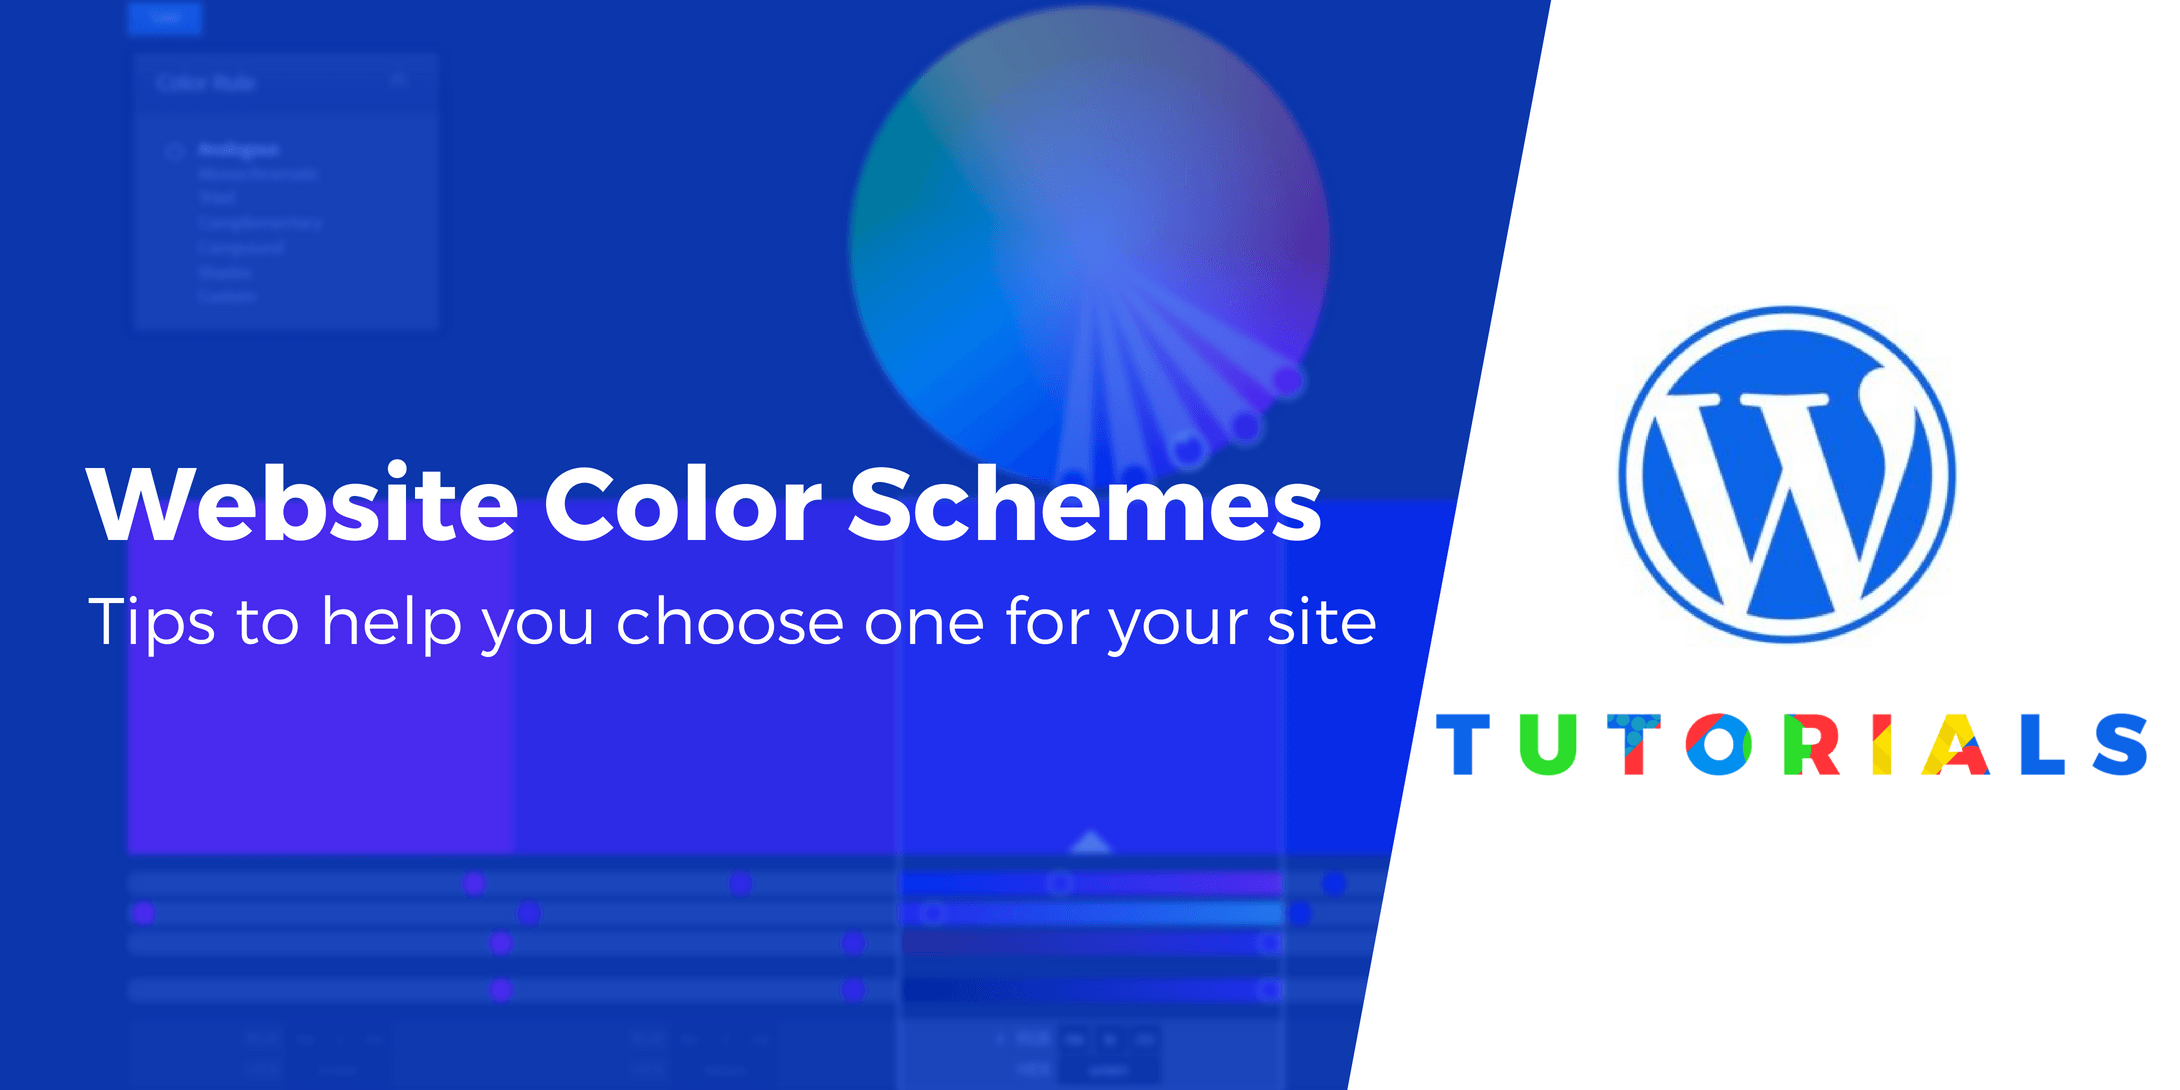 Blue Best Color for Logo - Color Schemes for Websites: How to Choose One for Your WordPress Site